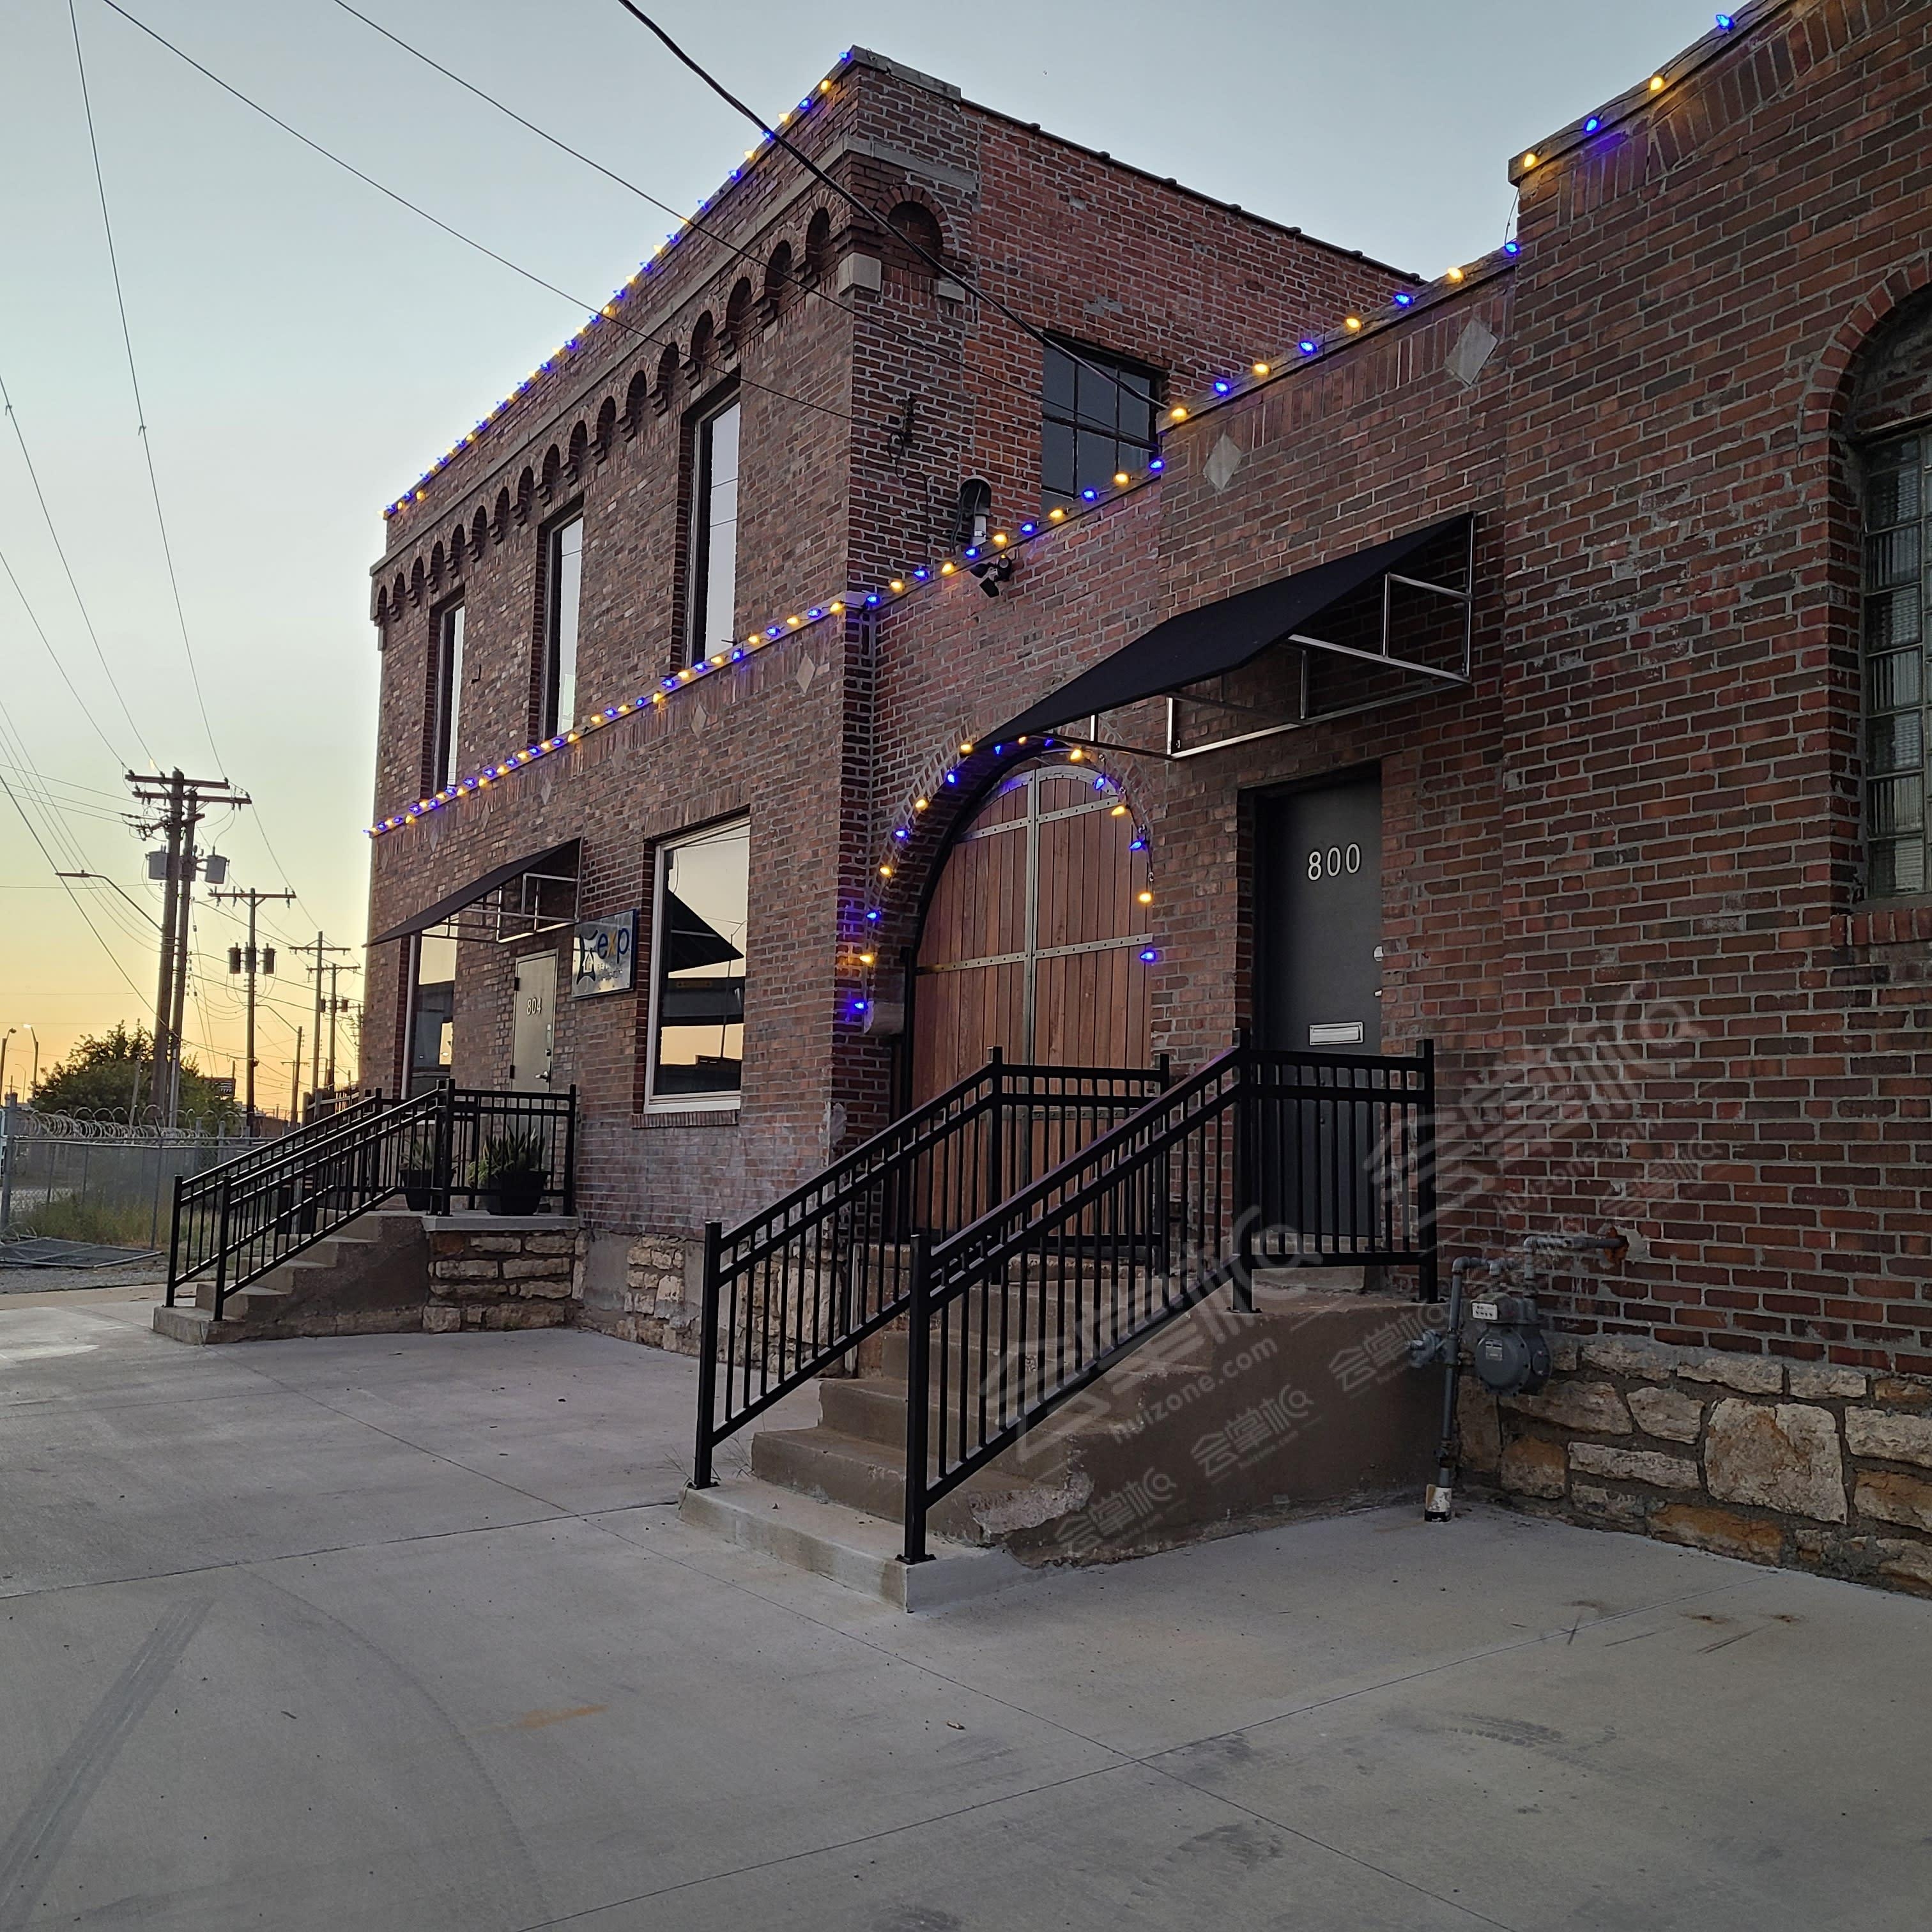 Riverview Event Space offers Contemporary Space Located on the Missouri River, 2 Blocks West of the River Market with Large Patio Area